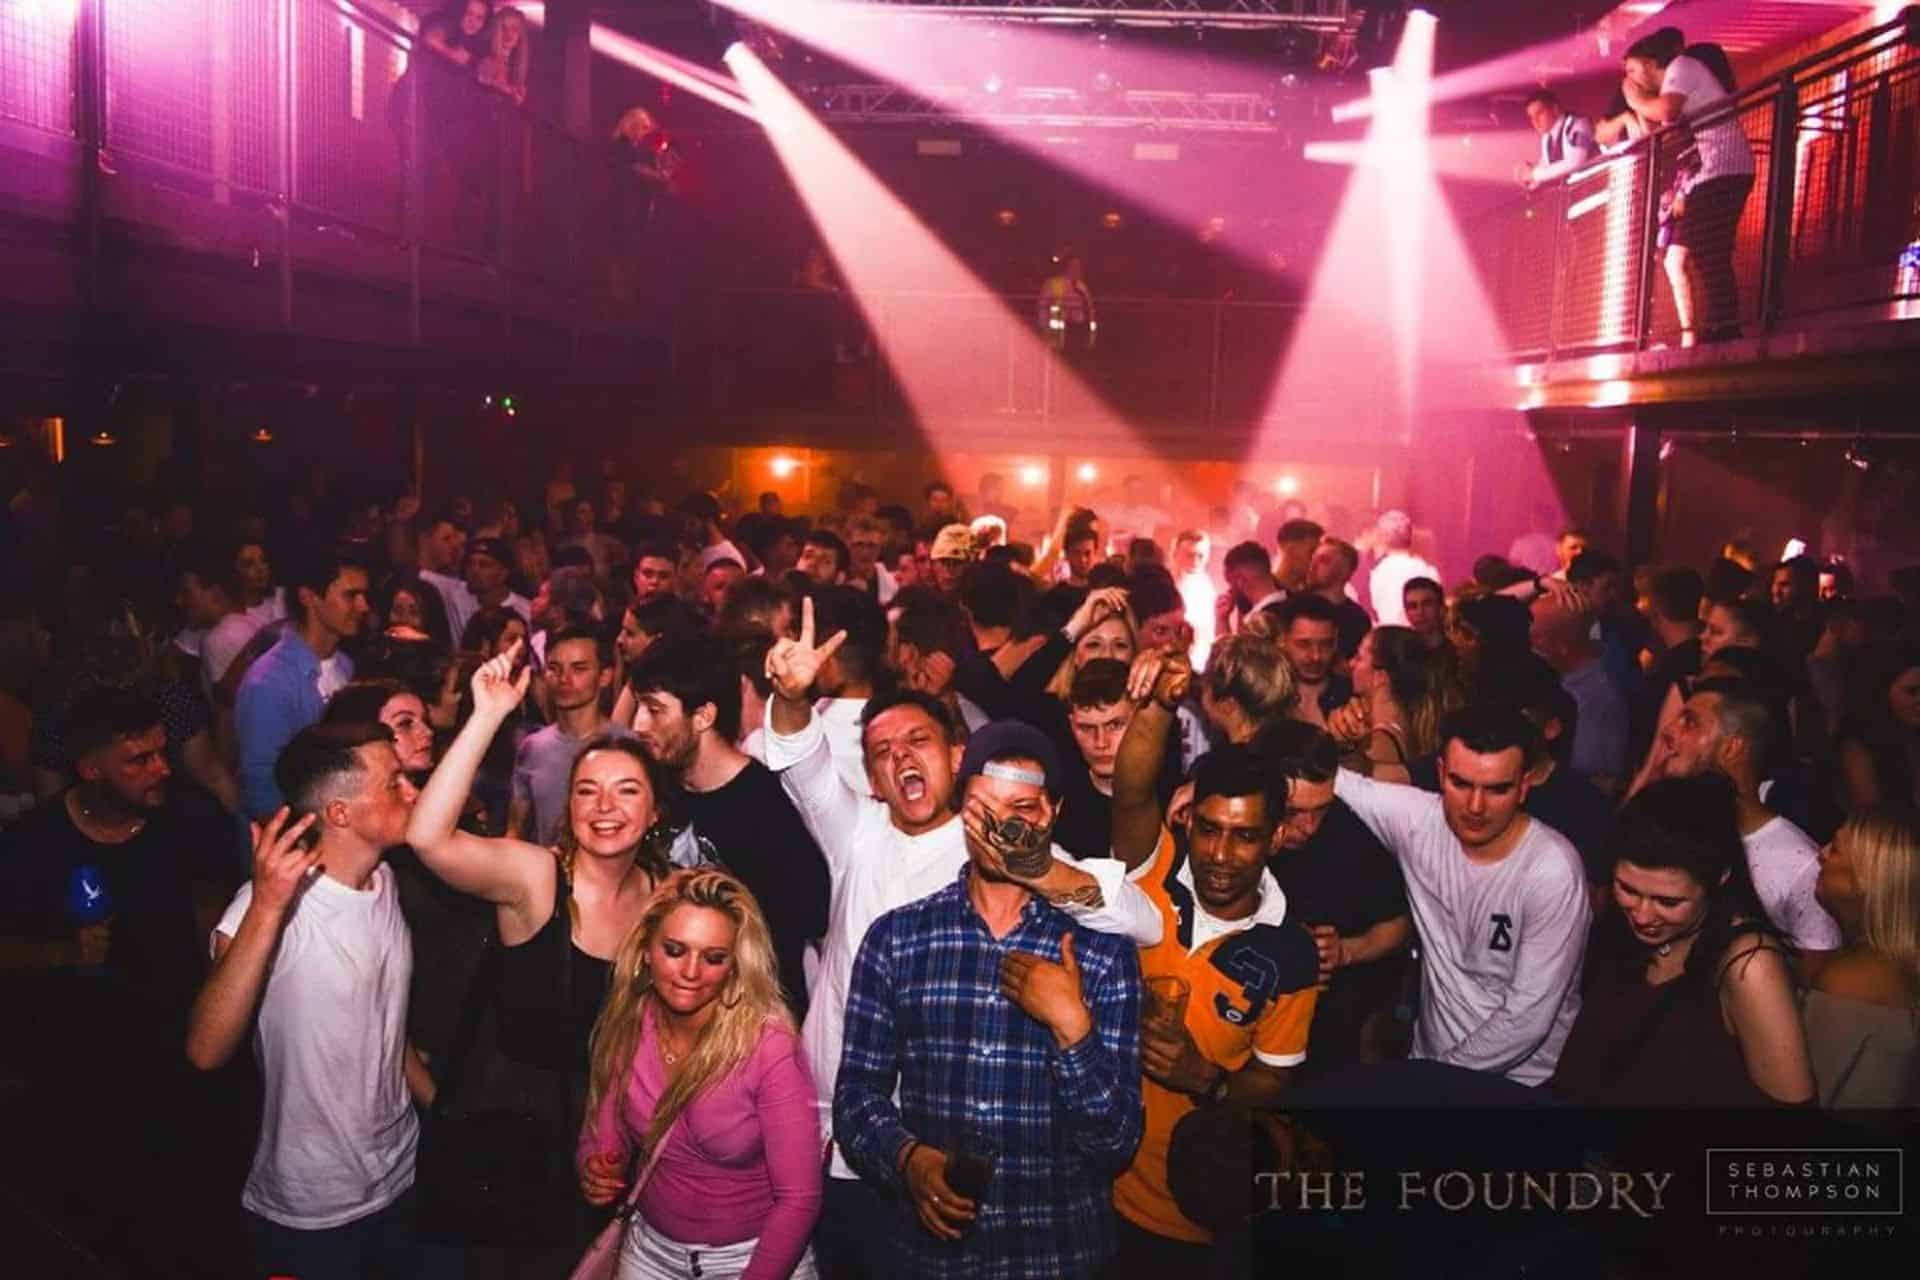 The Foundry in UK